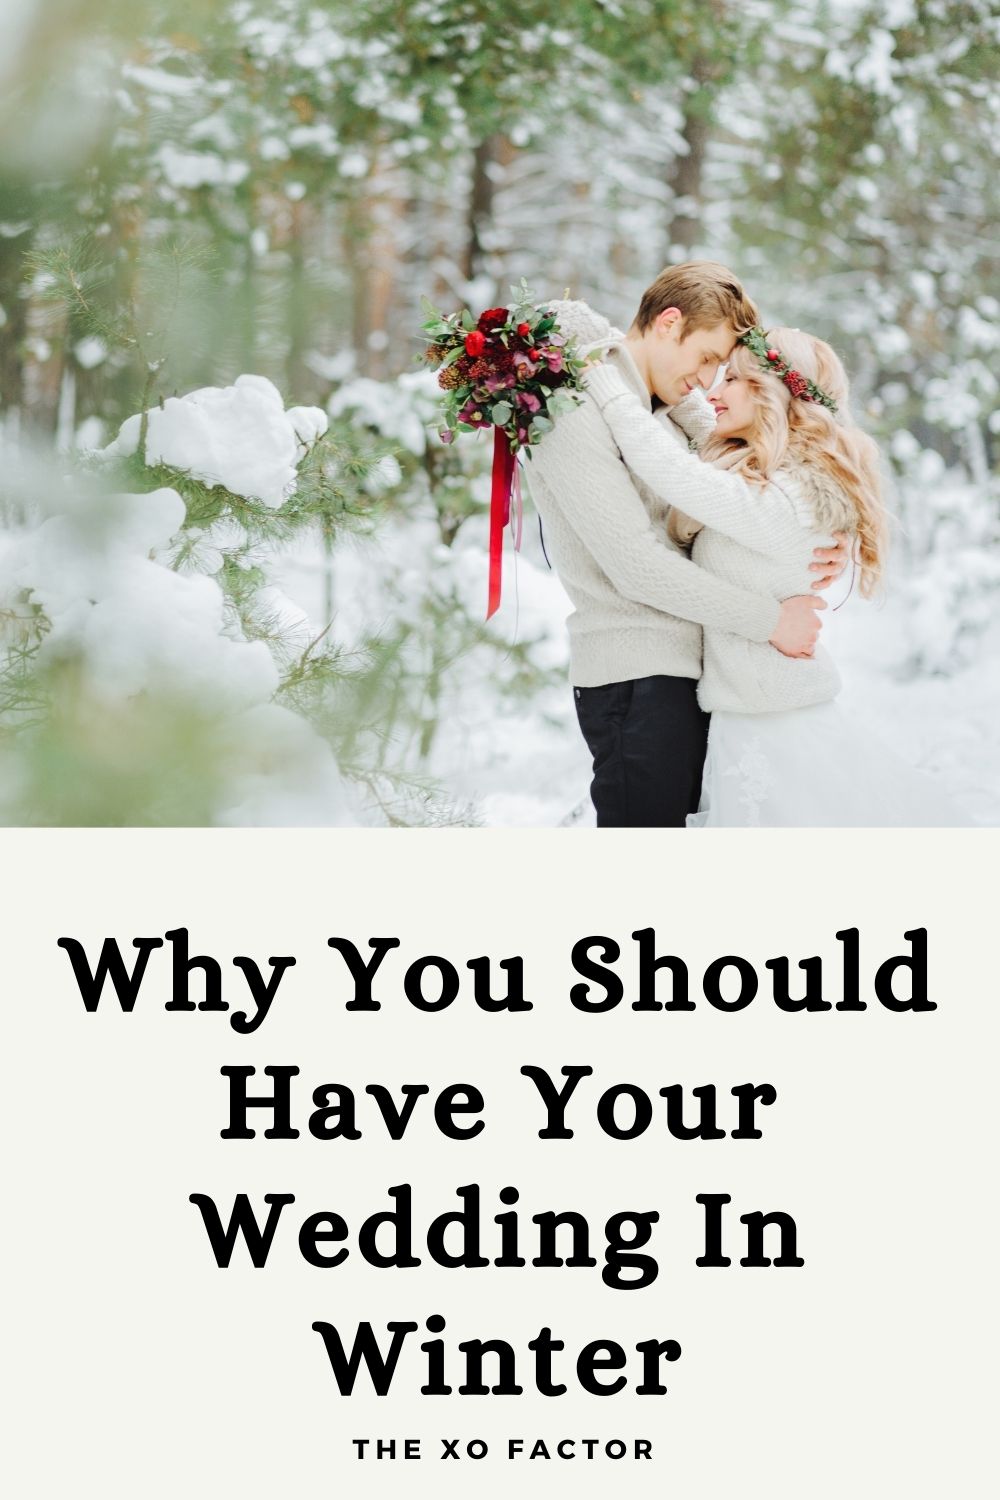 Why you should have your wedding in winter